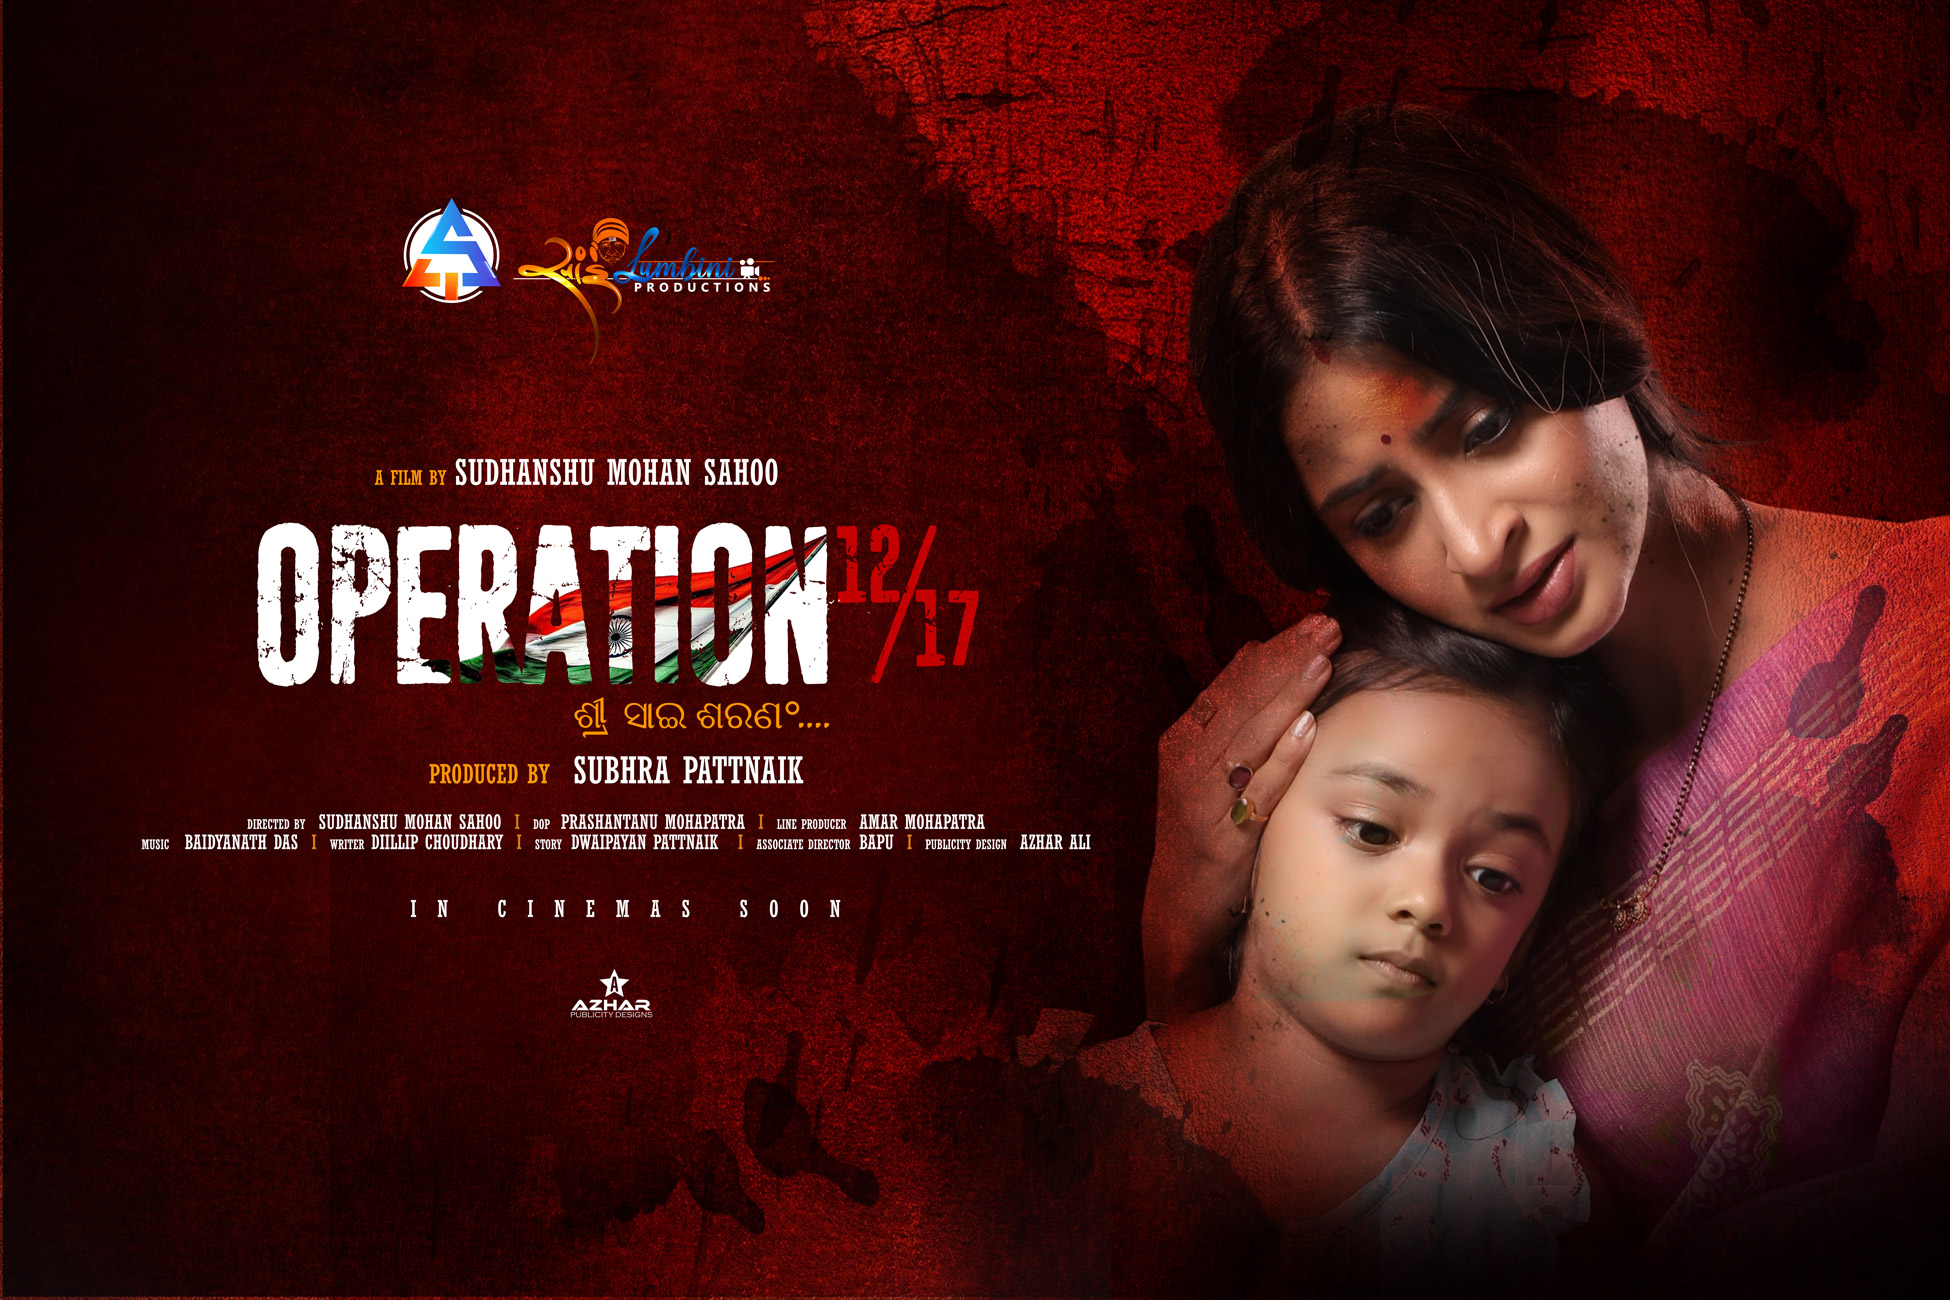 'Operation 12/17' official poster